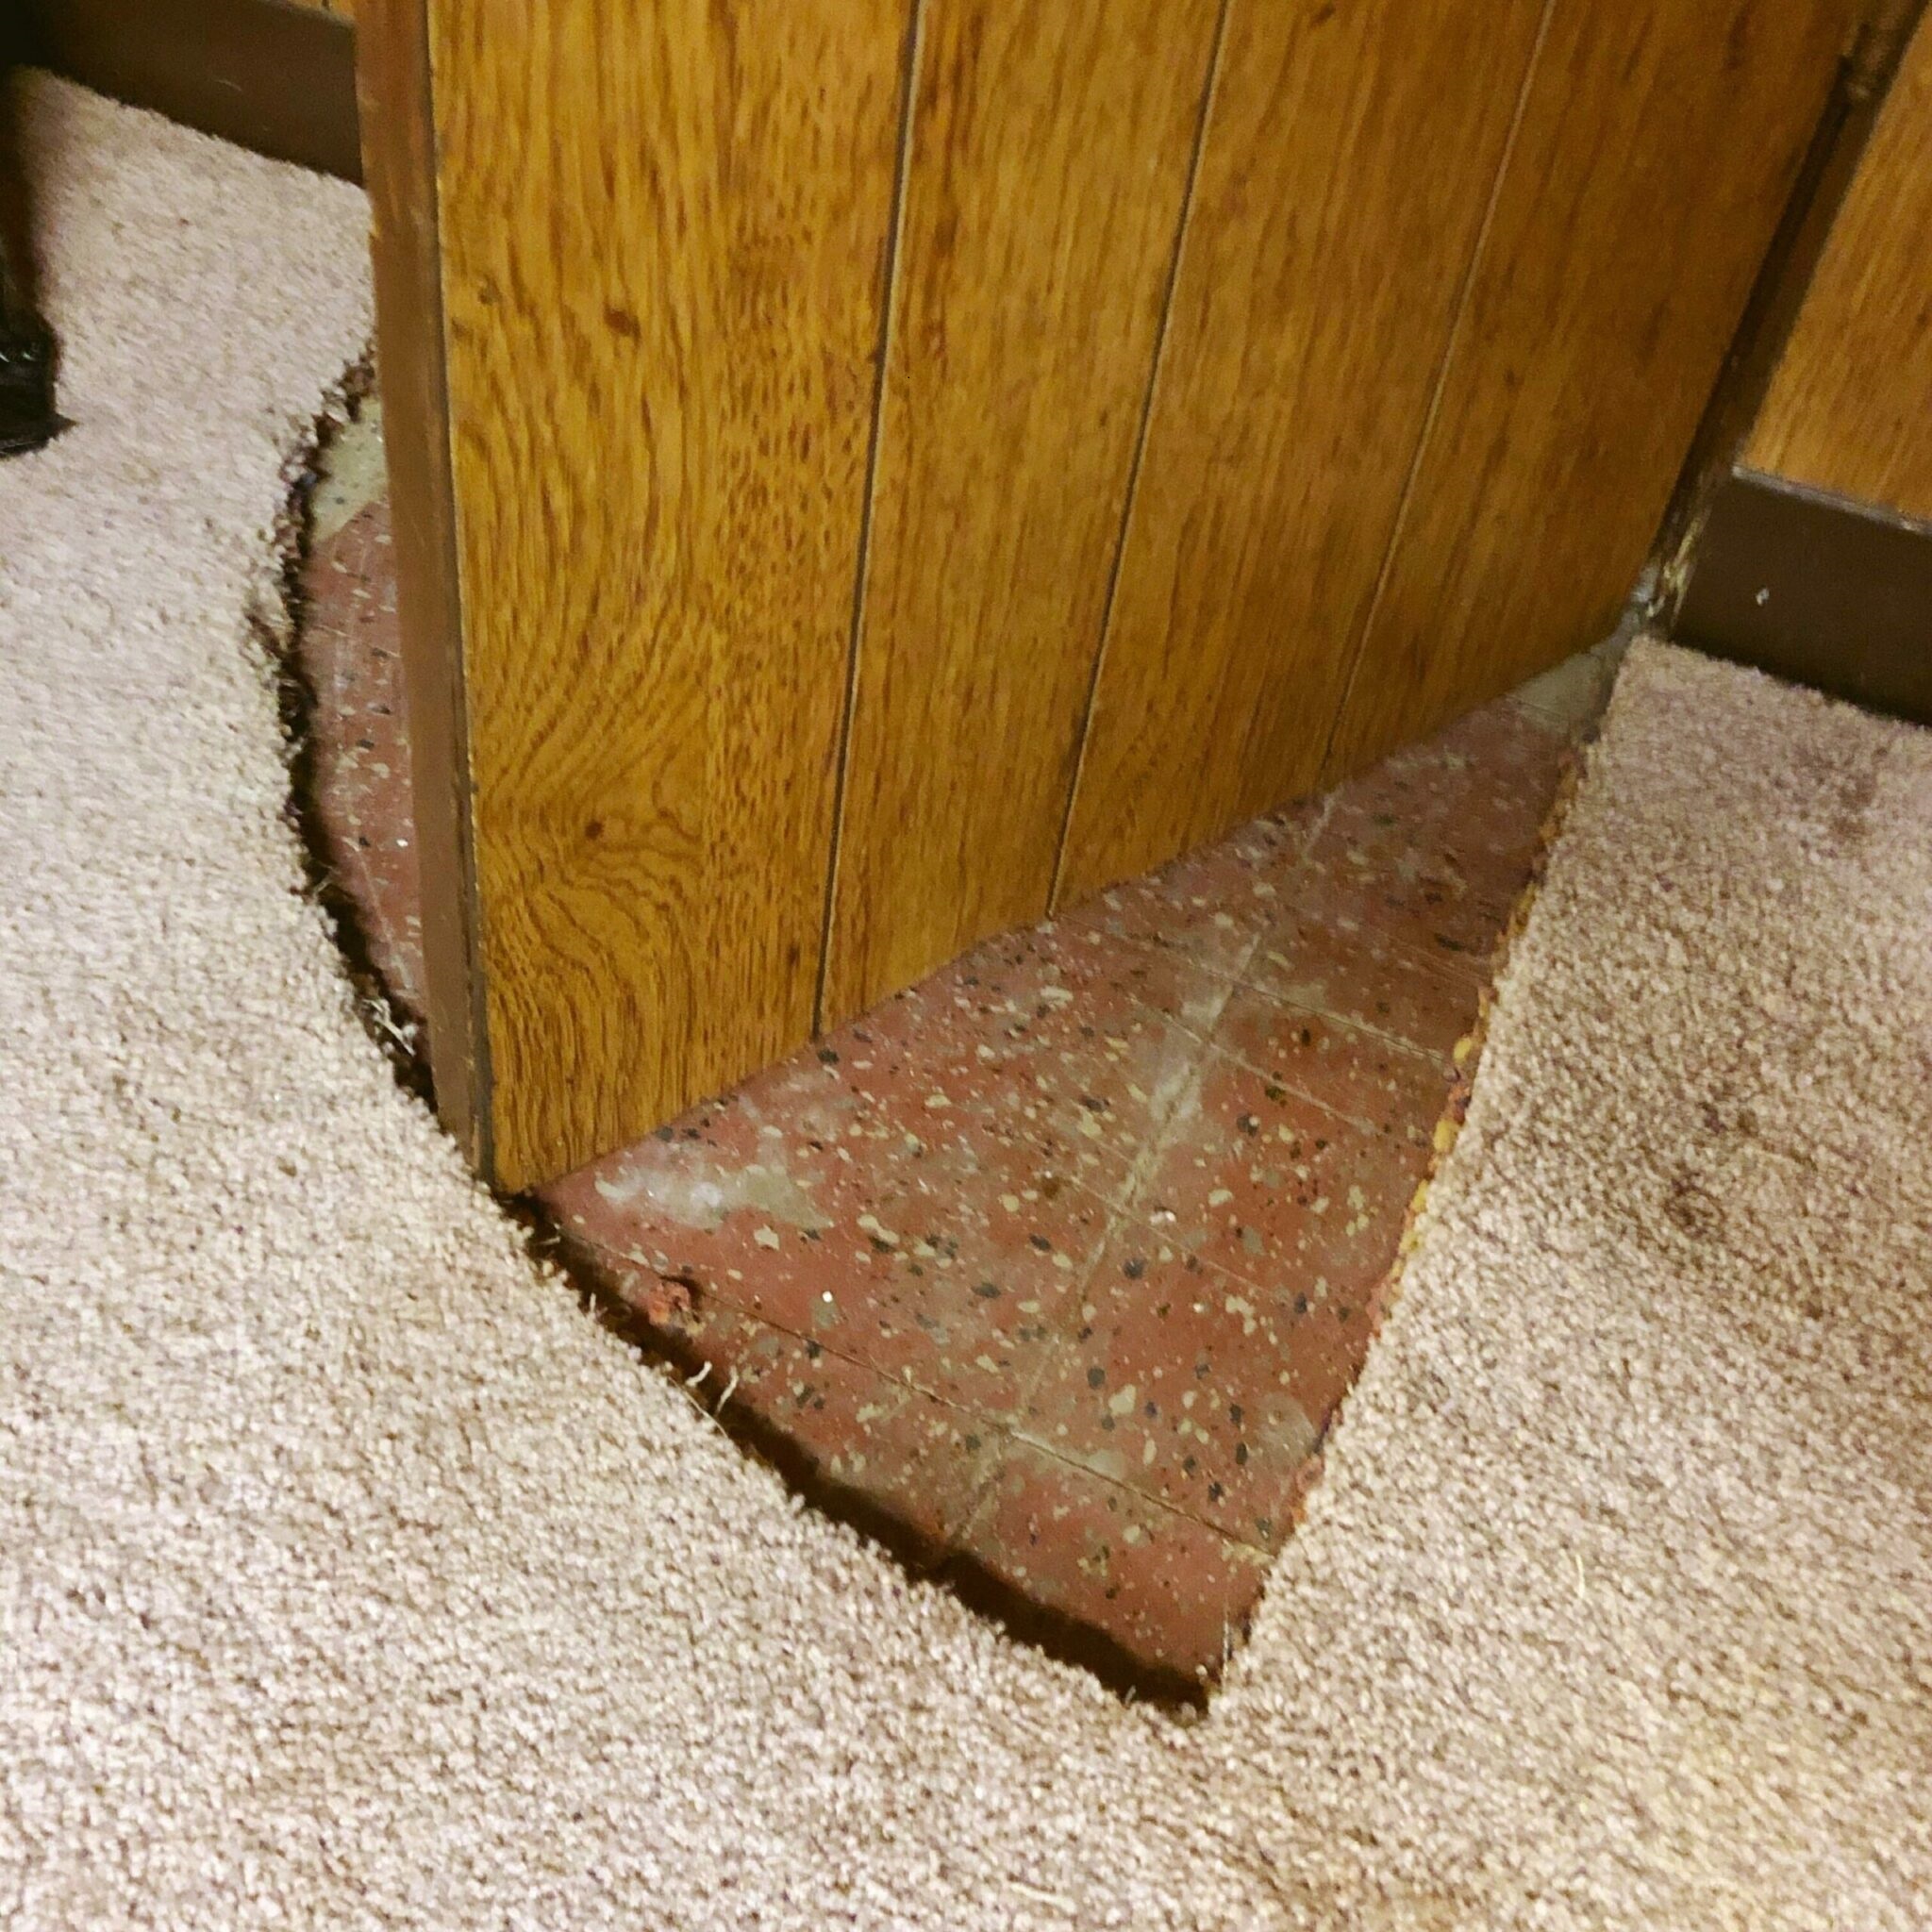 Why cut the door when you can cut the carpet instead! (Found in new house basement.)